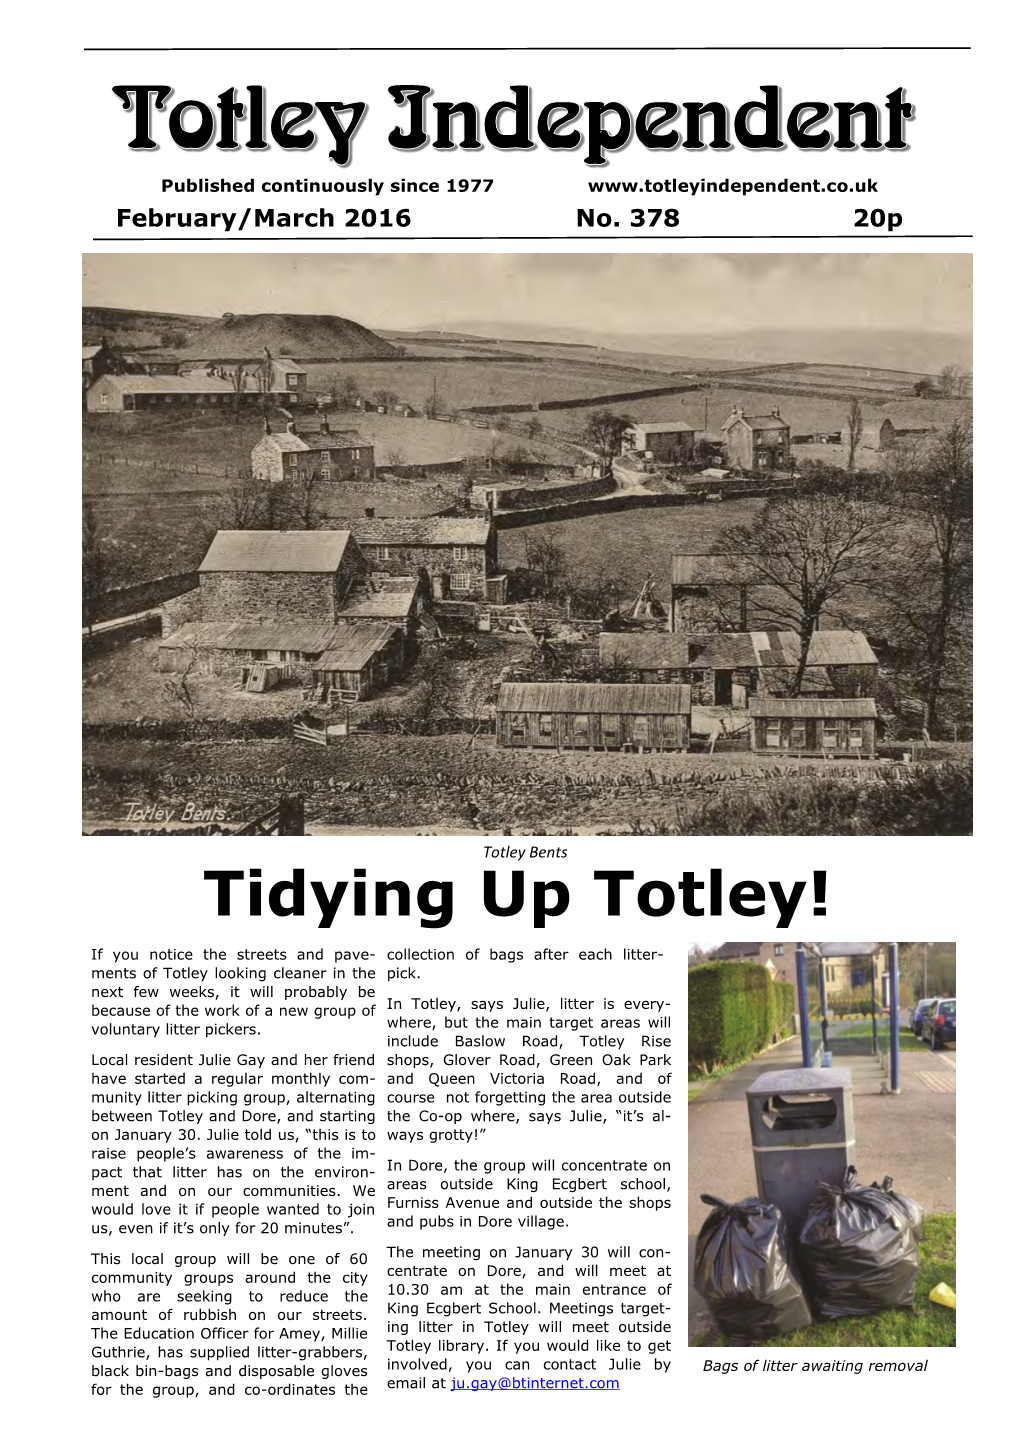 Tidying up Totley!